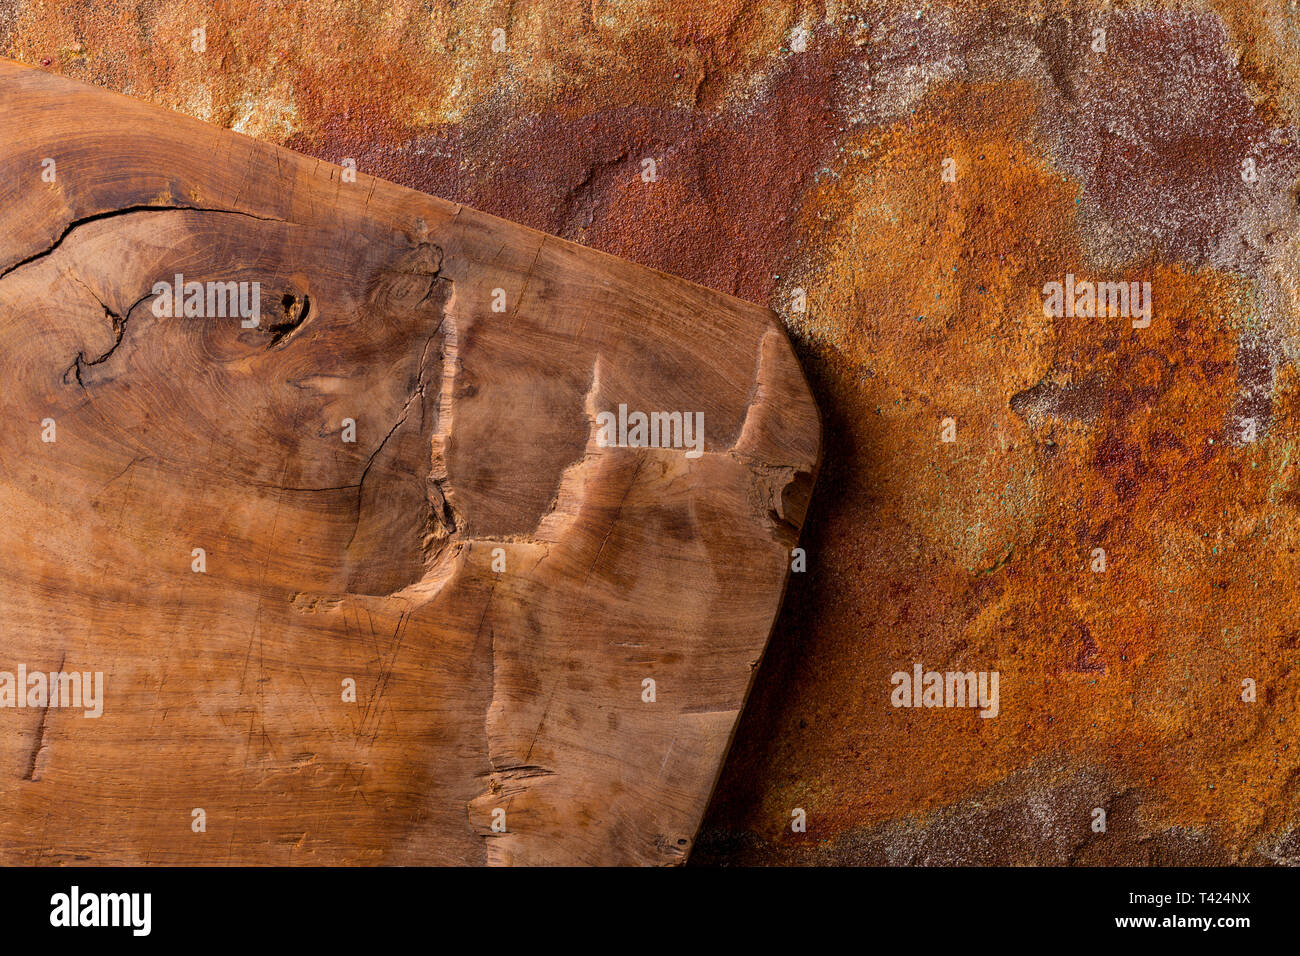 Vintage cutting board on rusty metal background, view from above Stock Photo